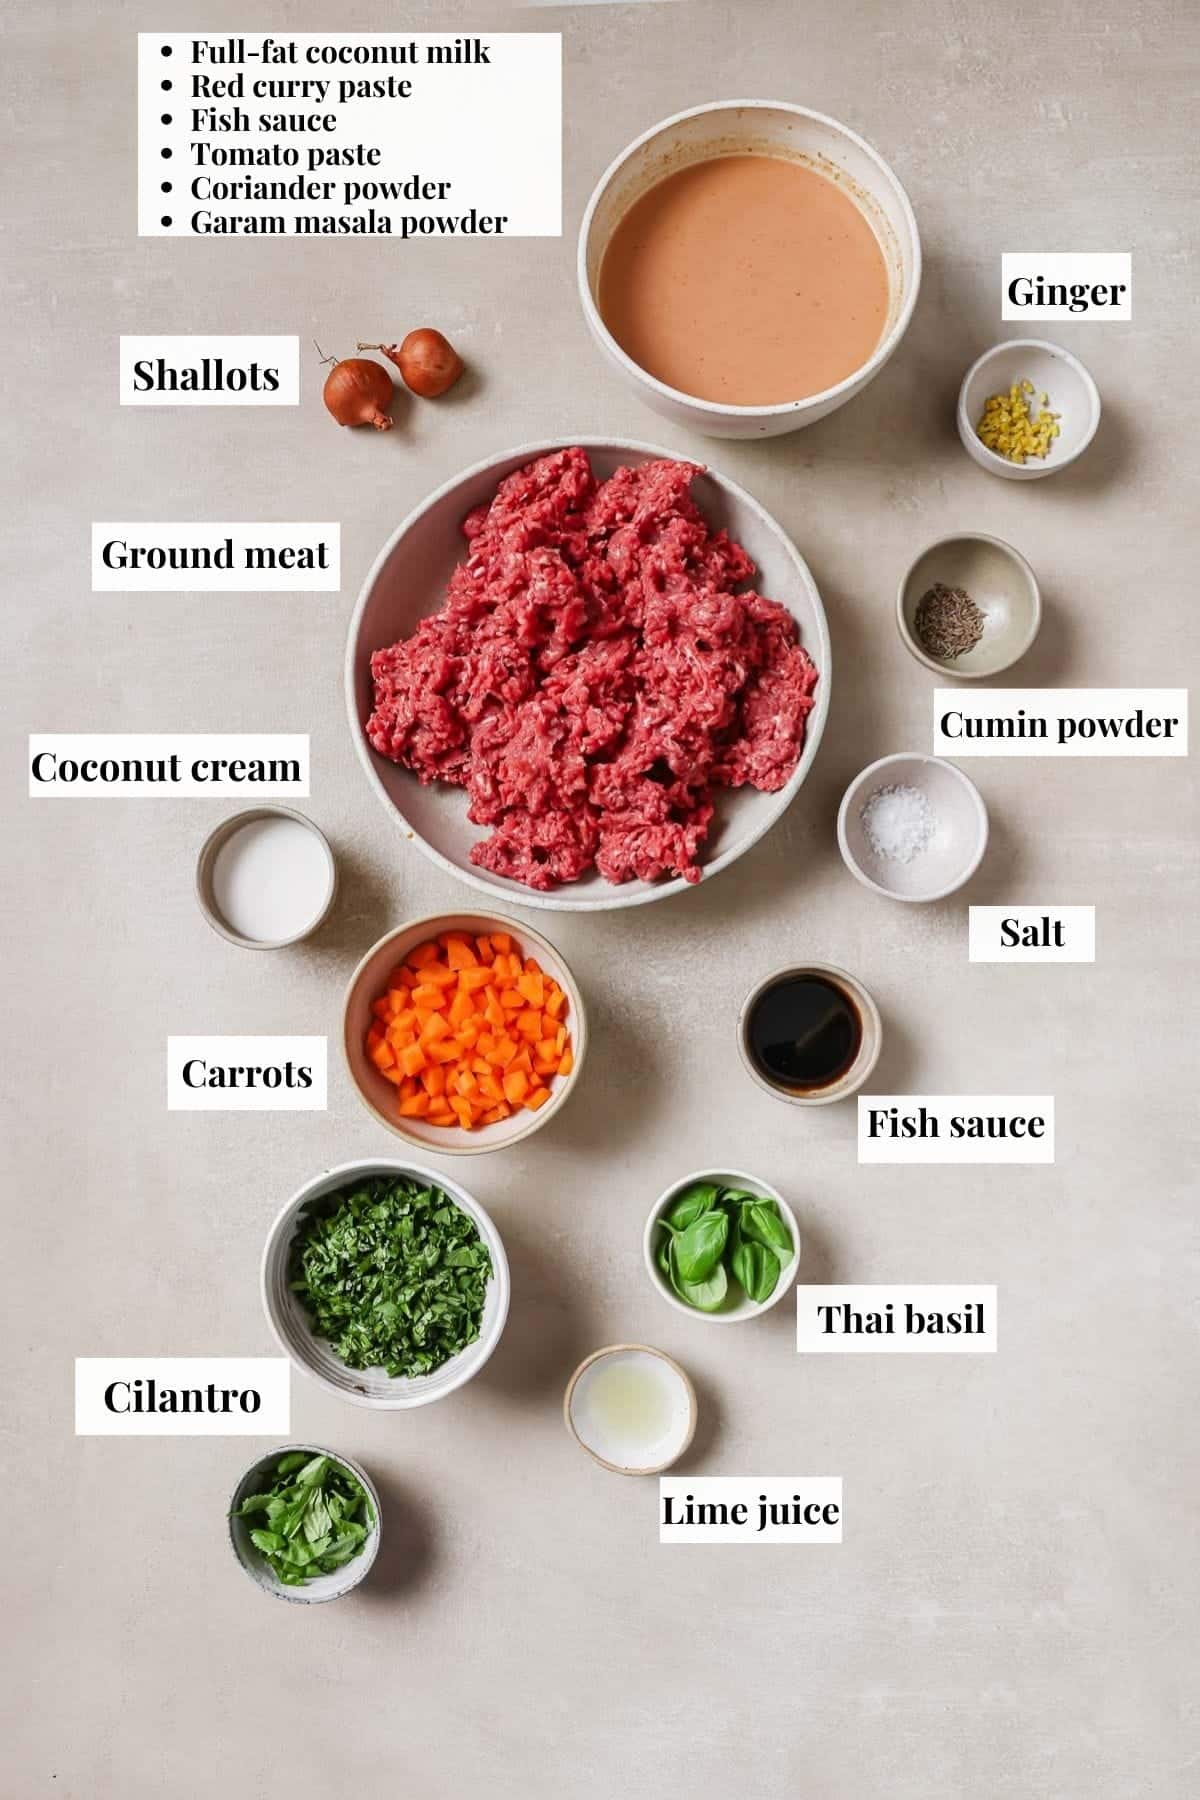 Image shows ingredients needed and used to make Thai meatballs with curry sauce.